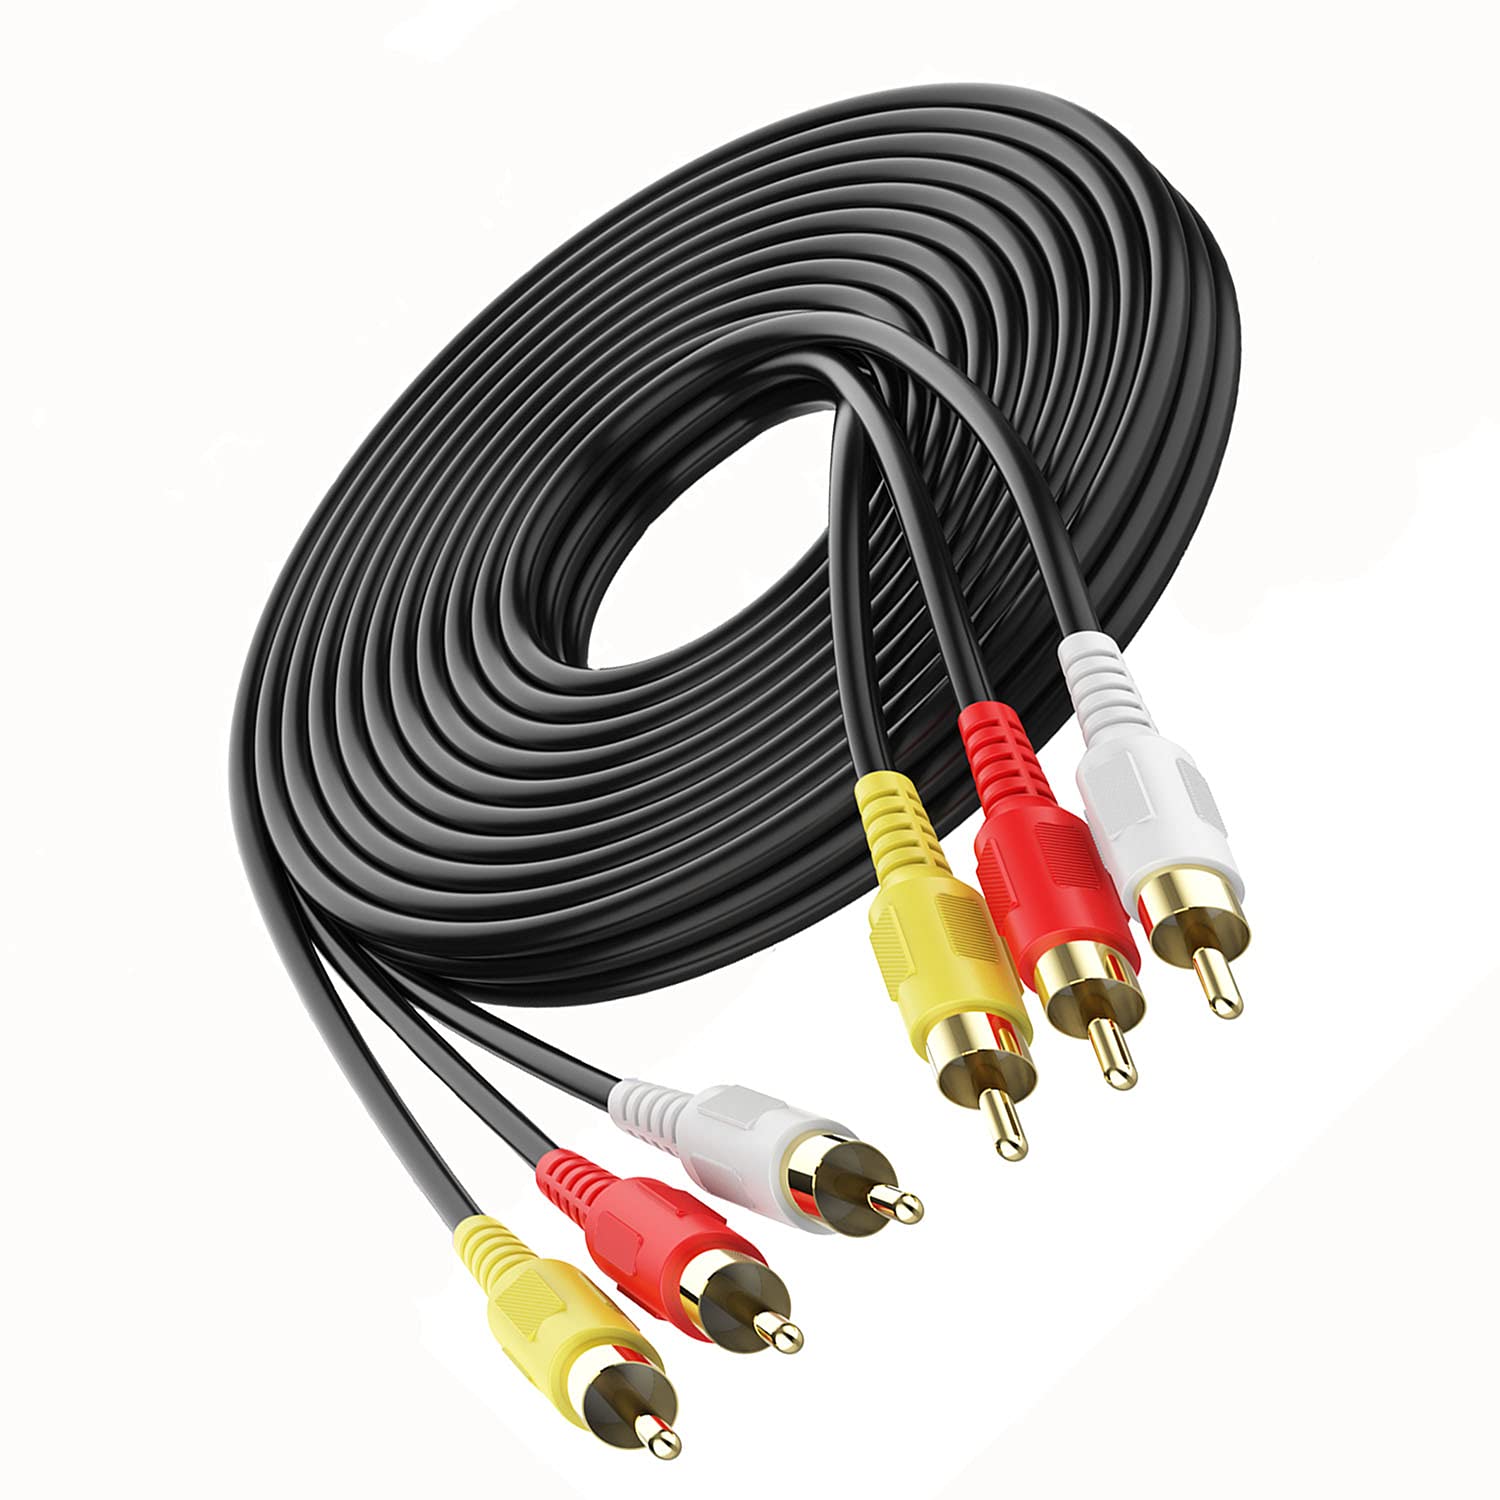 HZFLBN Audio Video Cable(20M/60FT) 3RCA to 3RCA Audio Video Composite AV Cable Compatible with VCR, Satellite and Home Theater receivers, Set-top Boxes, Speakers, amplifiers, DVD TVs，24K Gold Plated